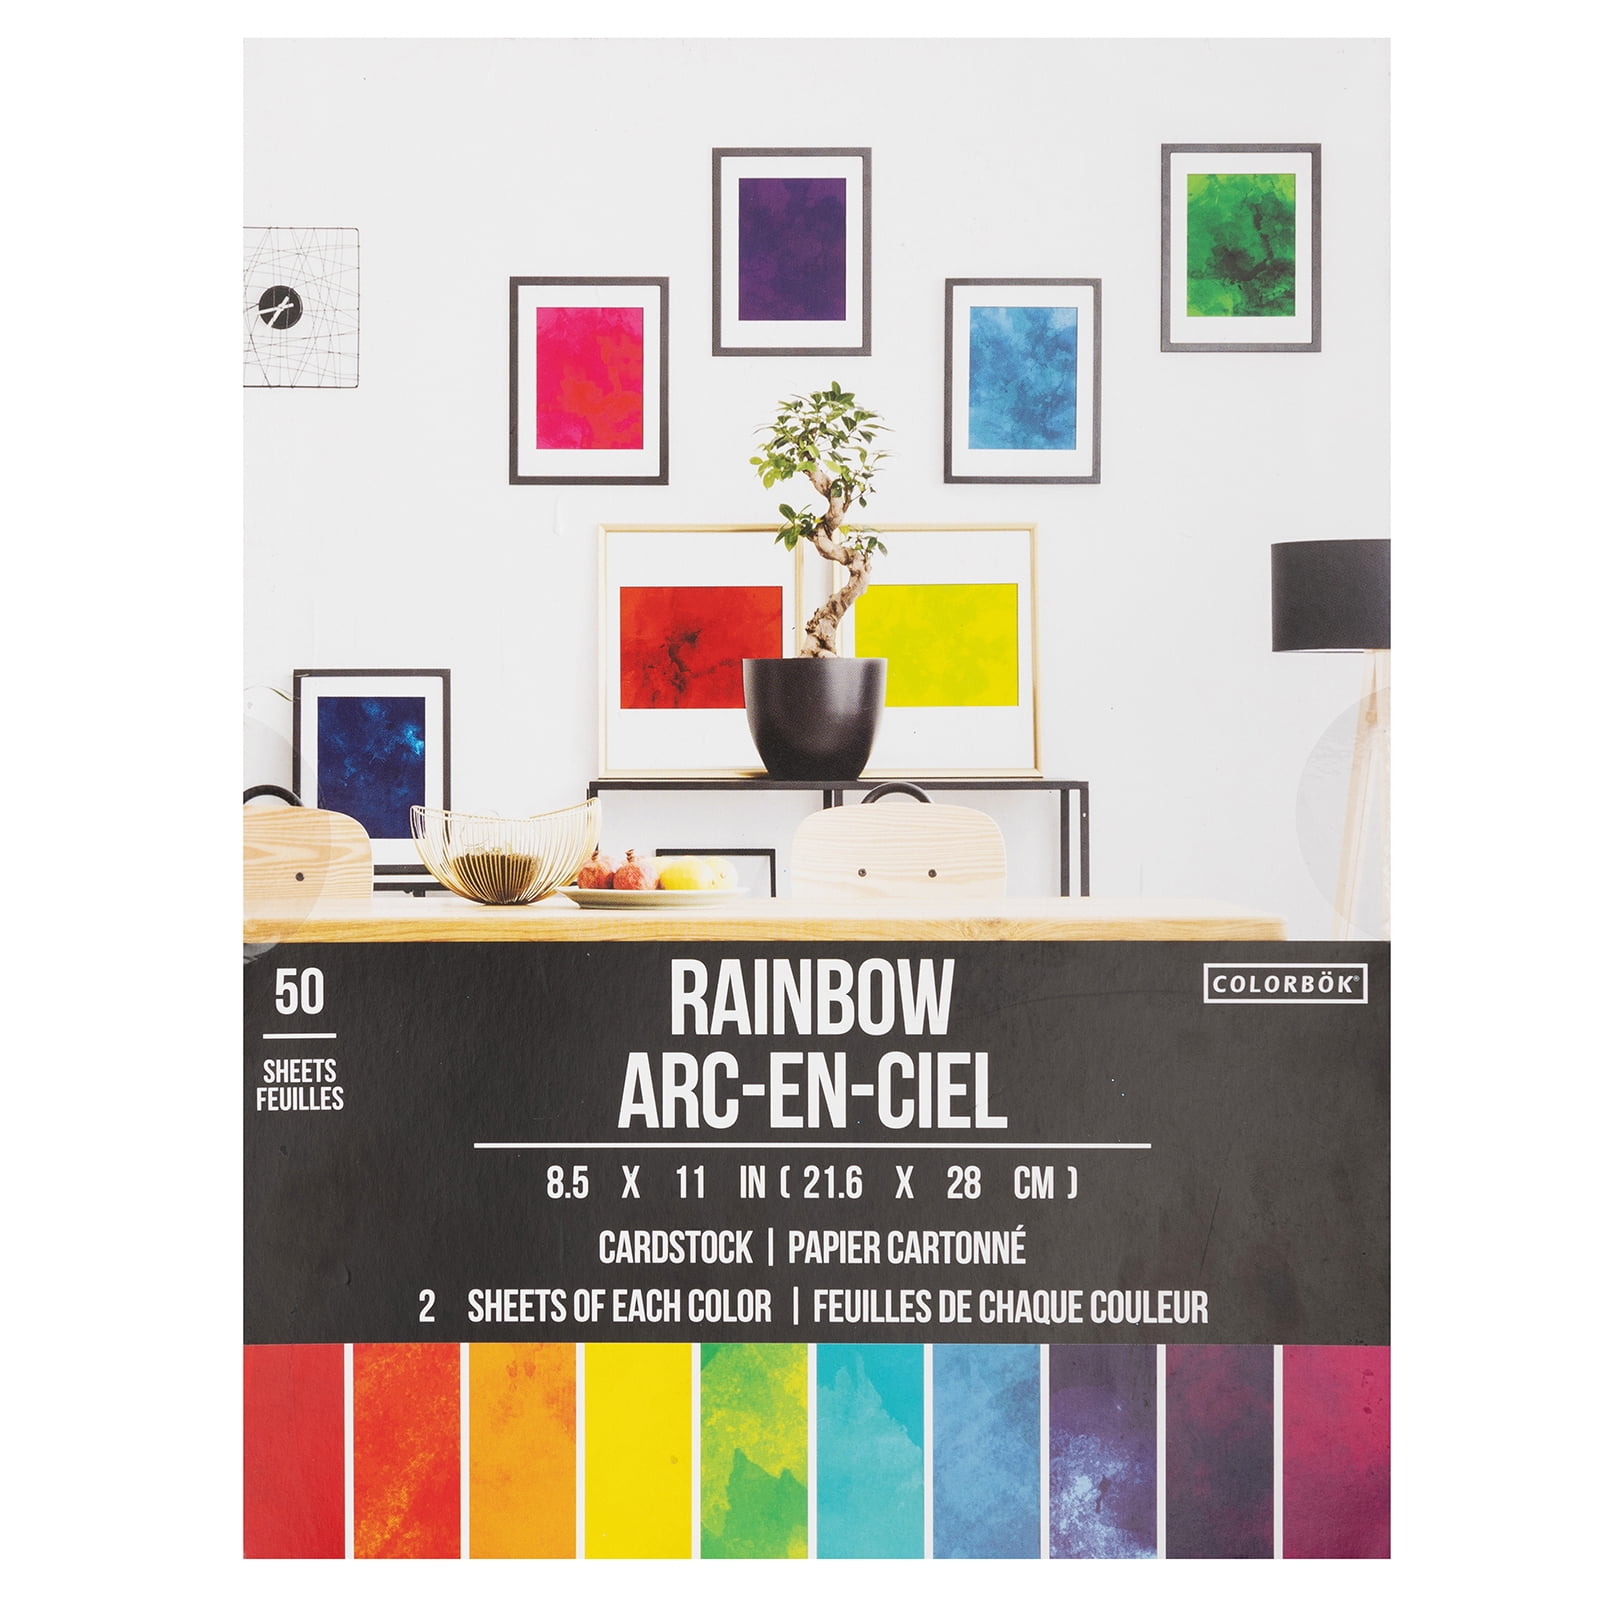 Stuff4 Primary Rainbow Cardstock Paper Pack 8.5 x 11 250 Sheets 65Ilb